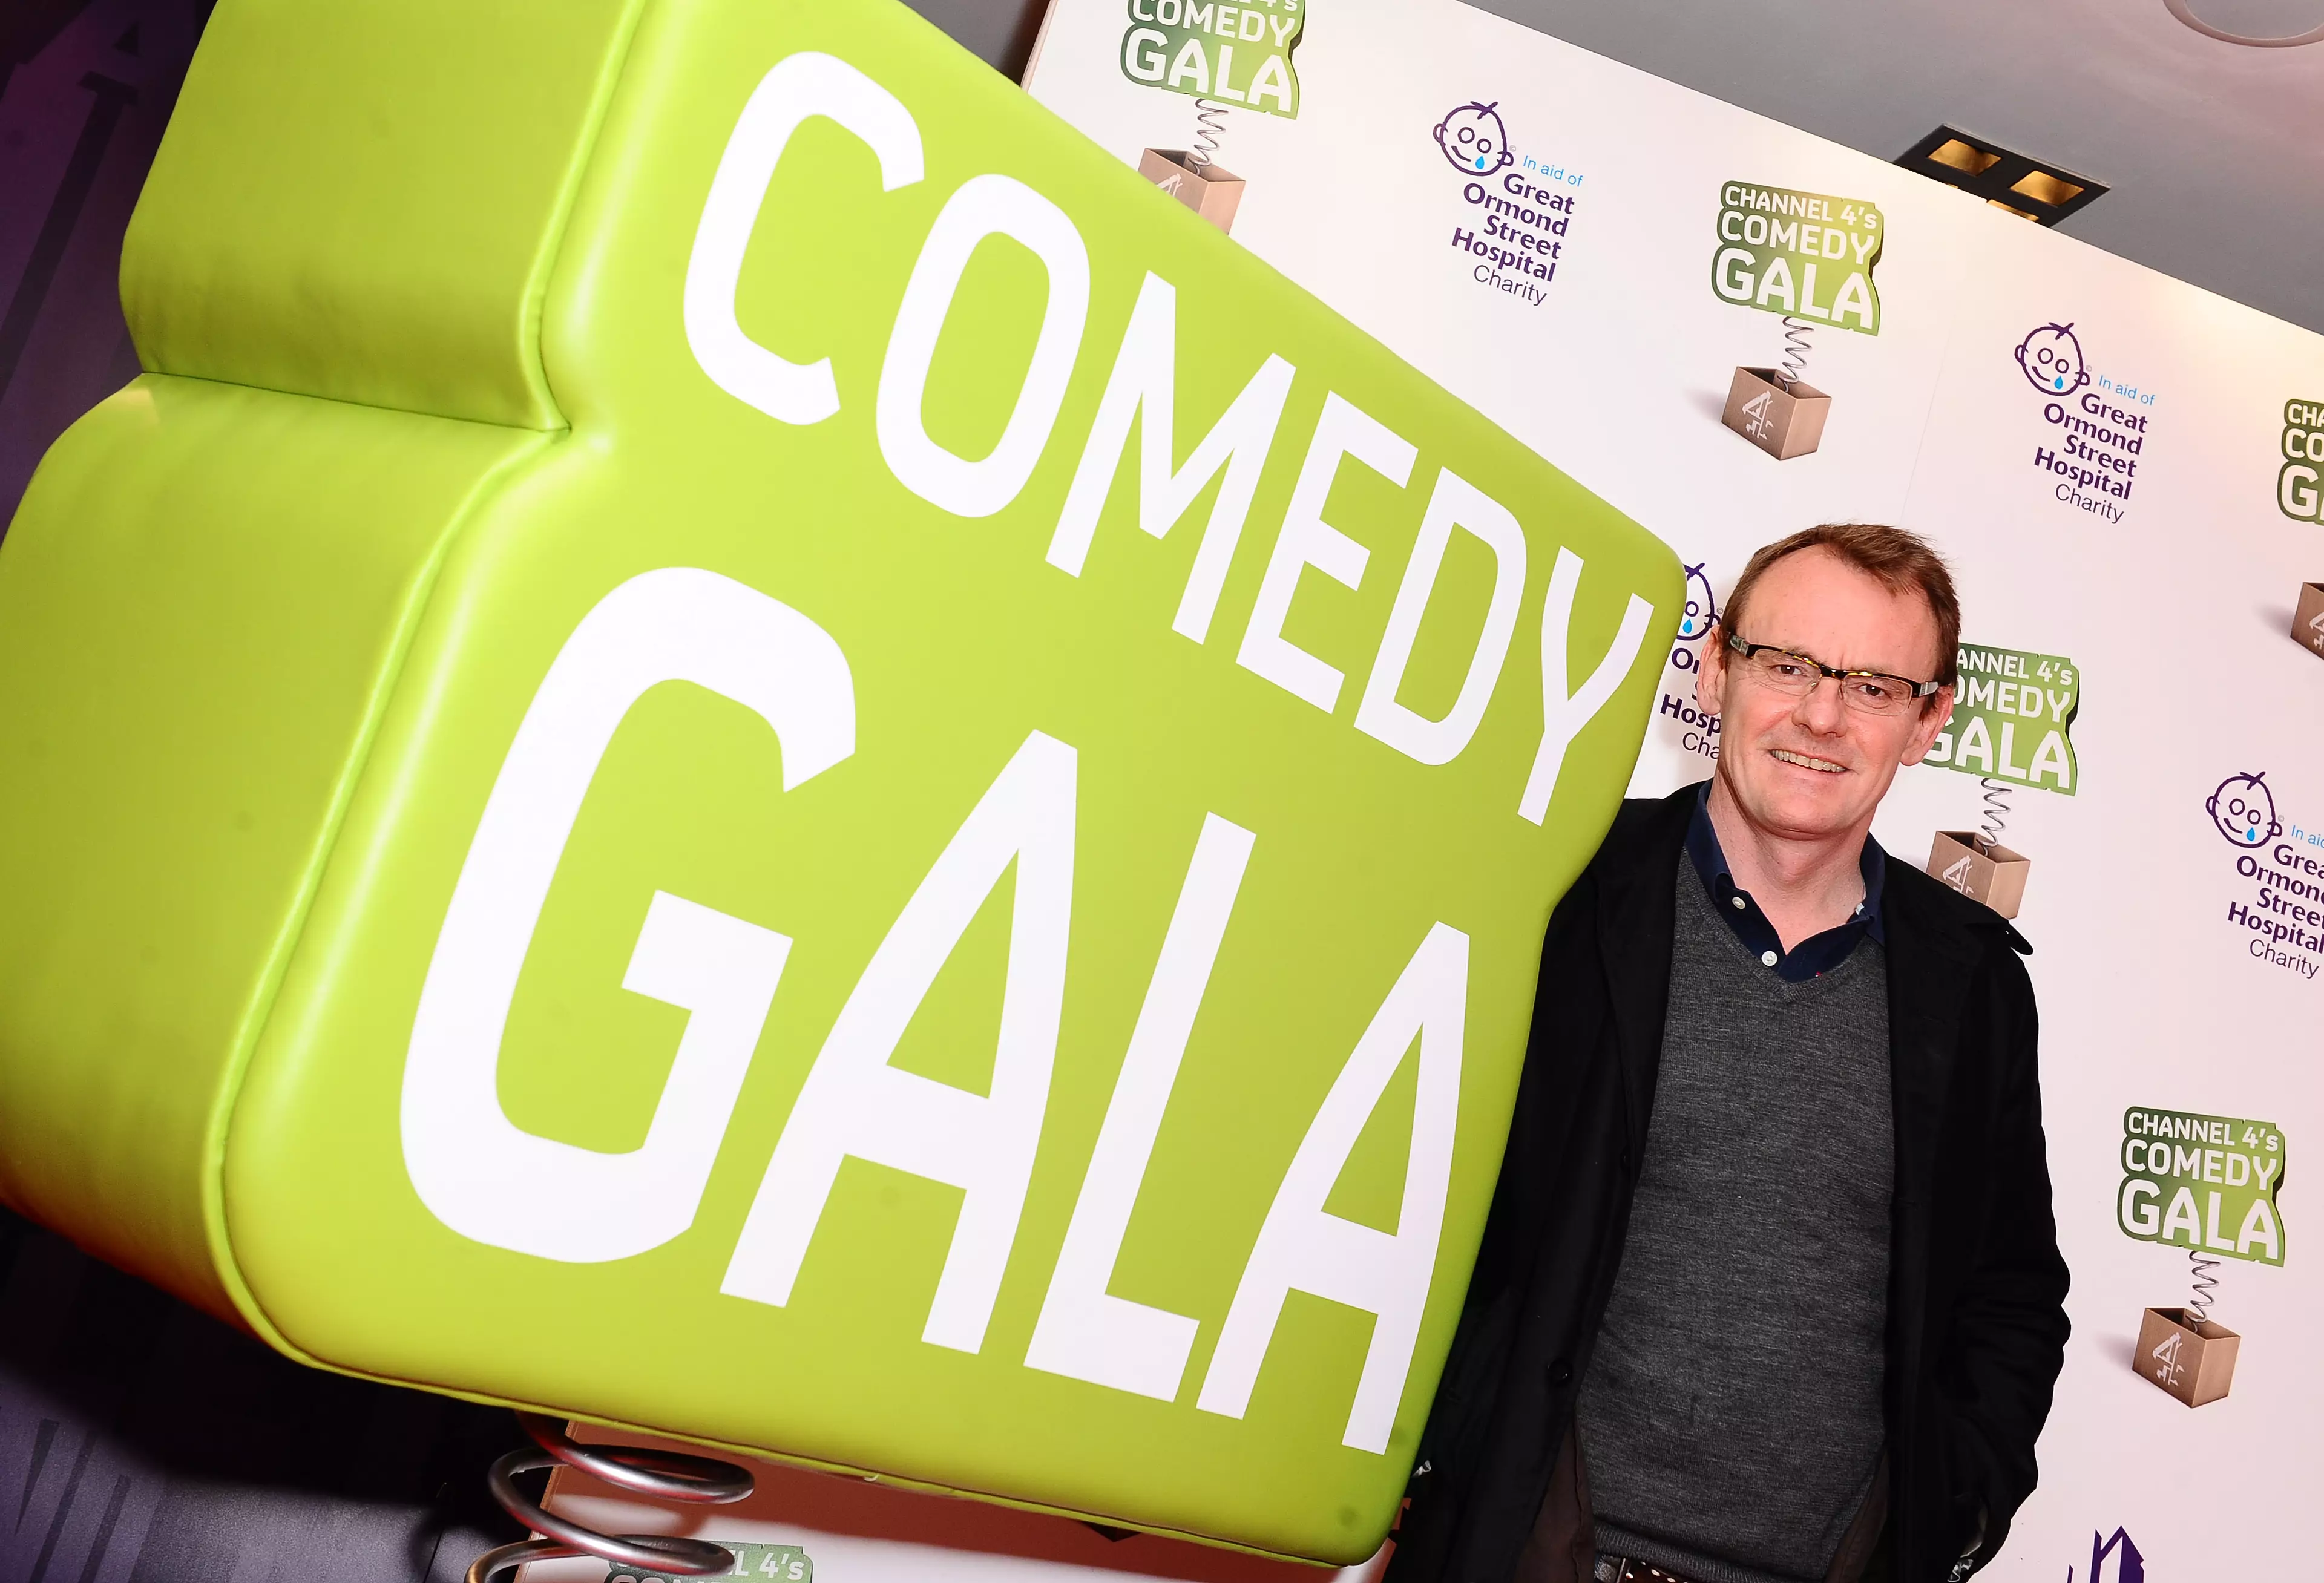 Sean Lock at the Channel 4 comedy gala in 2010. (